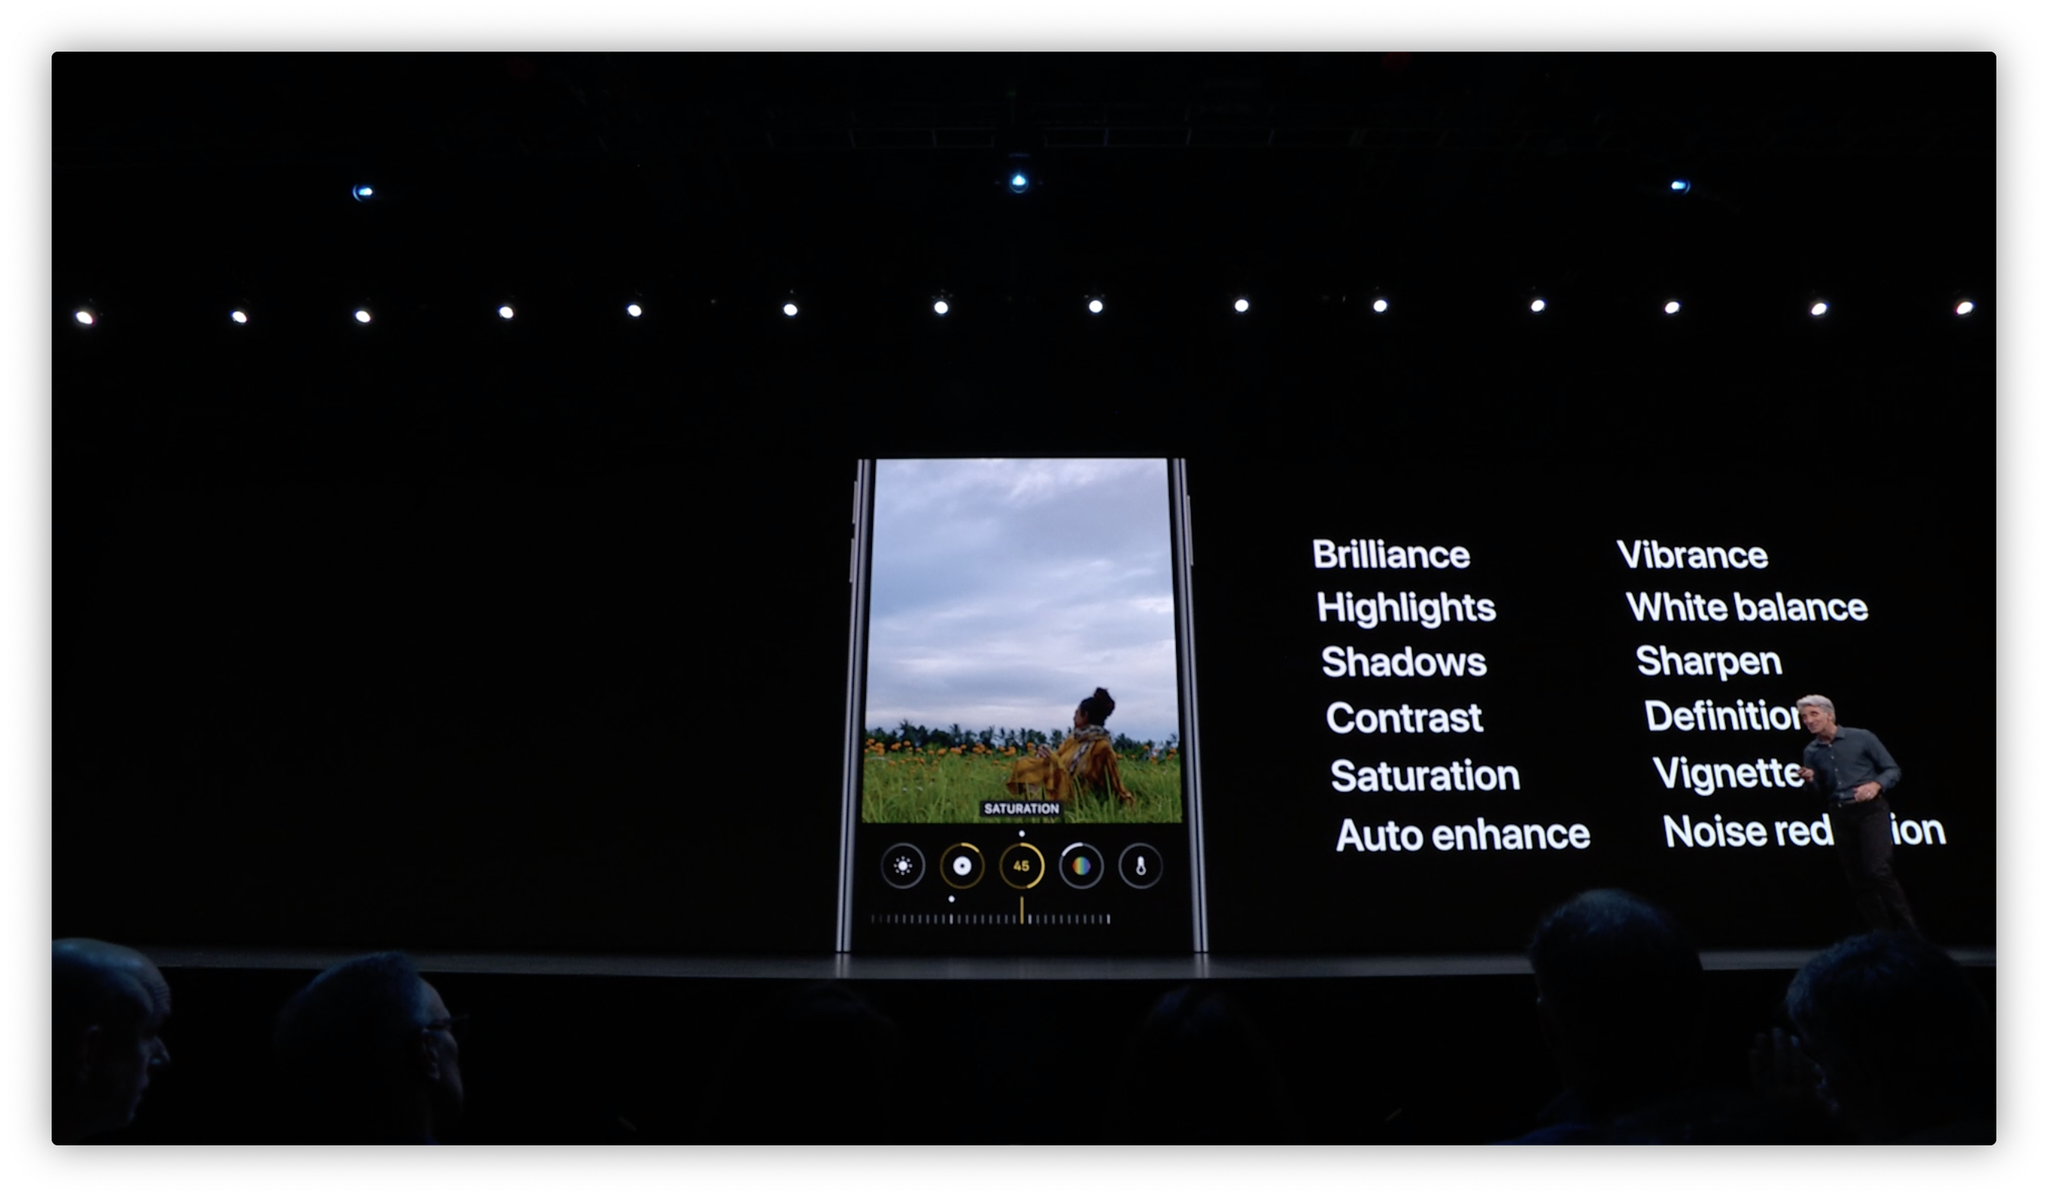 iOS 13 Photo Editing features